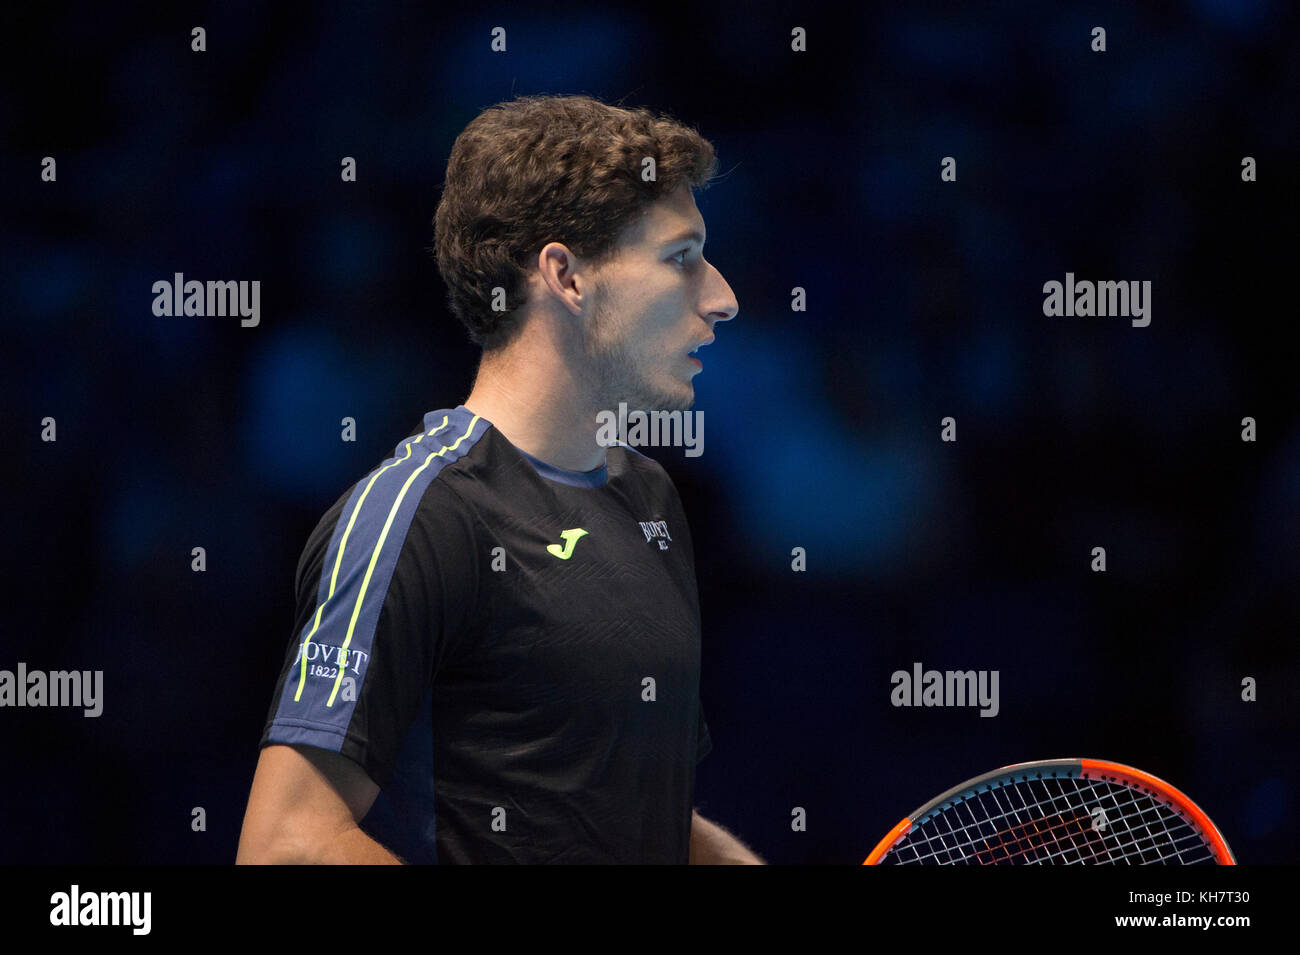 O2, London, UK. 15 November, 2017. Day 4 of the Nitto ATP Finals, evening singles match, Pablo Carreno Busta (ESP) vs Dominic Thiem (AUT). Busta’s first match as a stand-in for Rafael Nadal who pulled out of the tournament on 13 November through injury. Thiem is match winner 6-3 3-6 6-4. Credit: Malcolm Park/Alamy Live News. Stock Photo